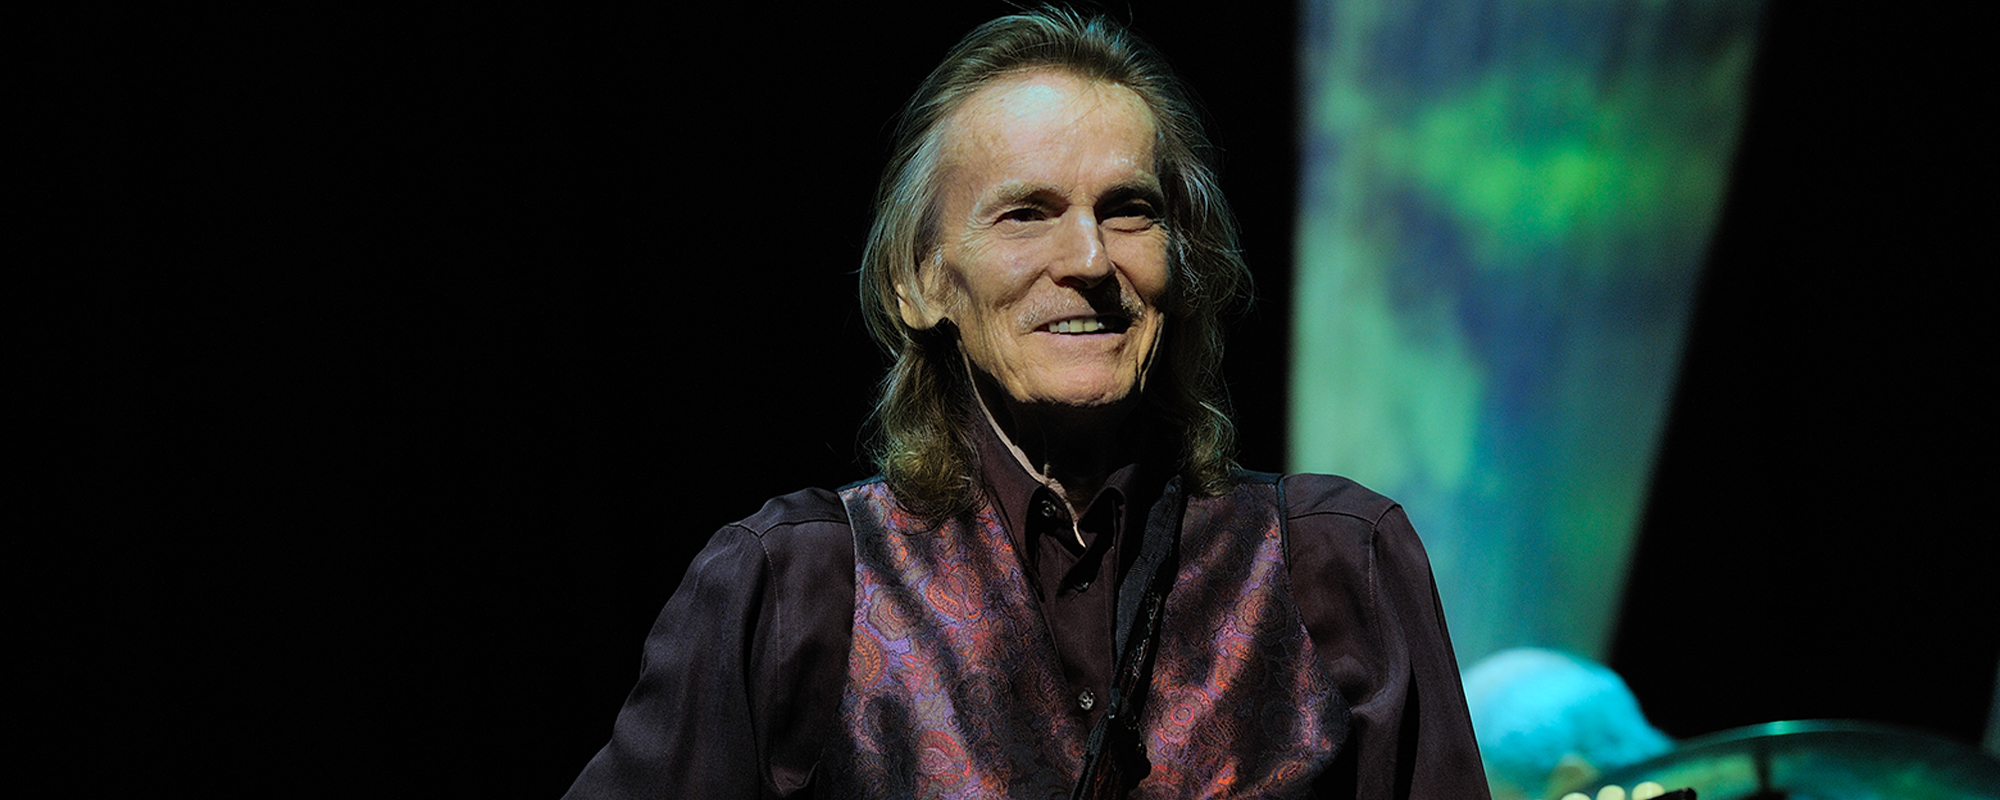 Gordon Lightfoot Shows No Signs of Slowing Down at 82—“I Was Into It For The Longevity”